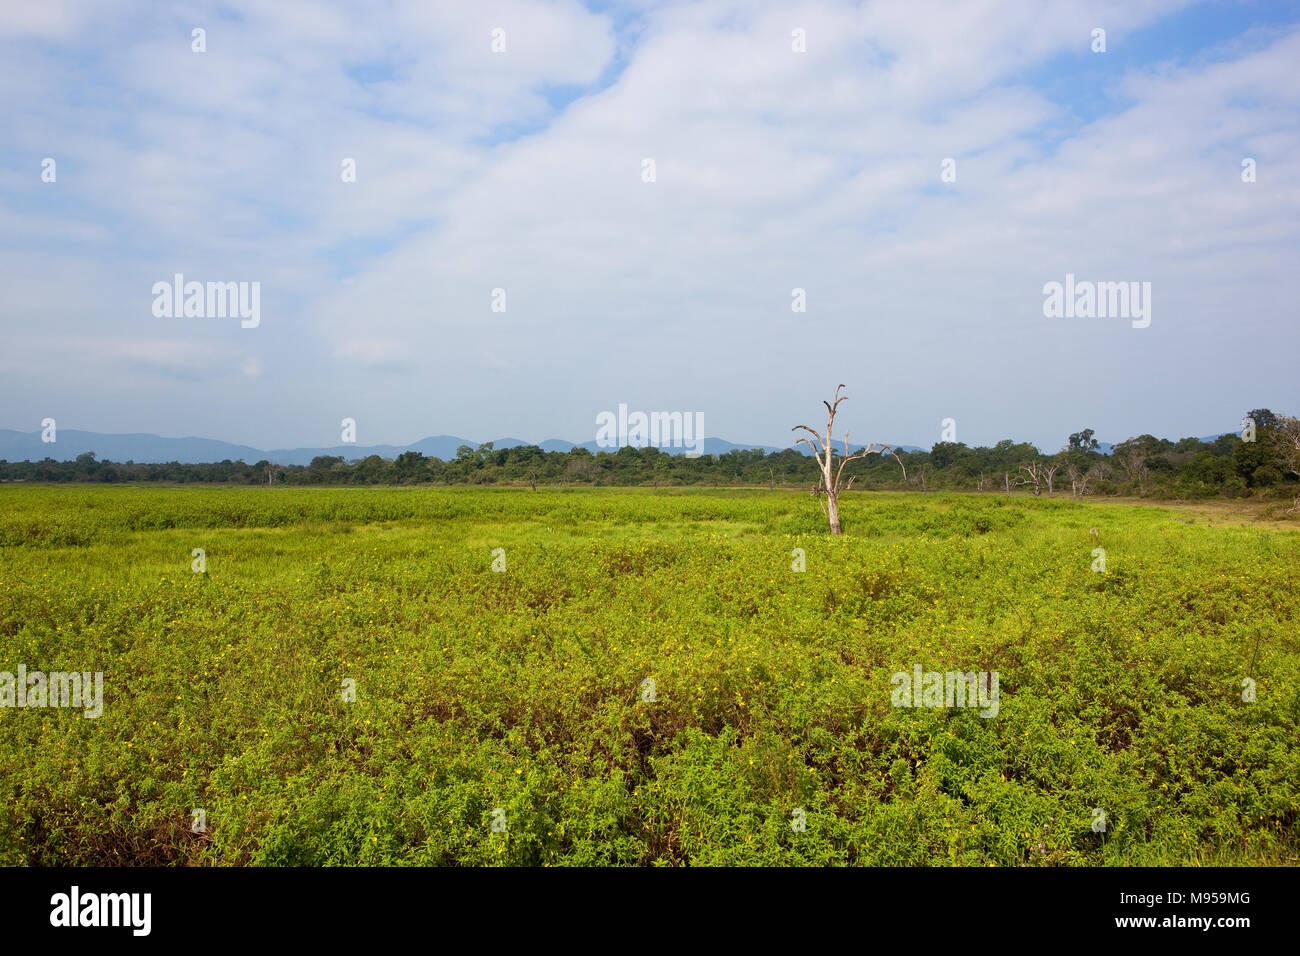 sri lankan countryside with tropical forest and mountain scenery with a dead tree under a blue cloudy sky Stock Photo